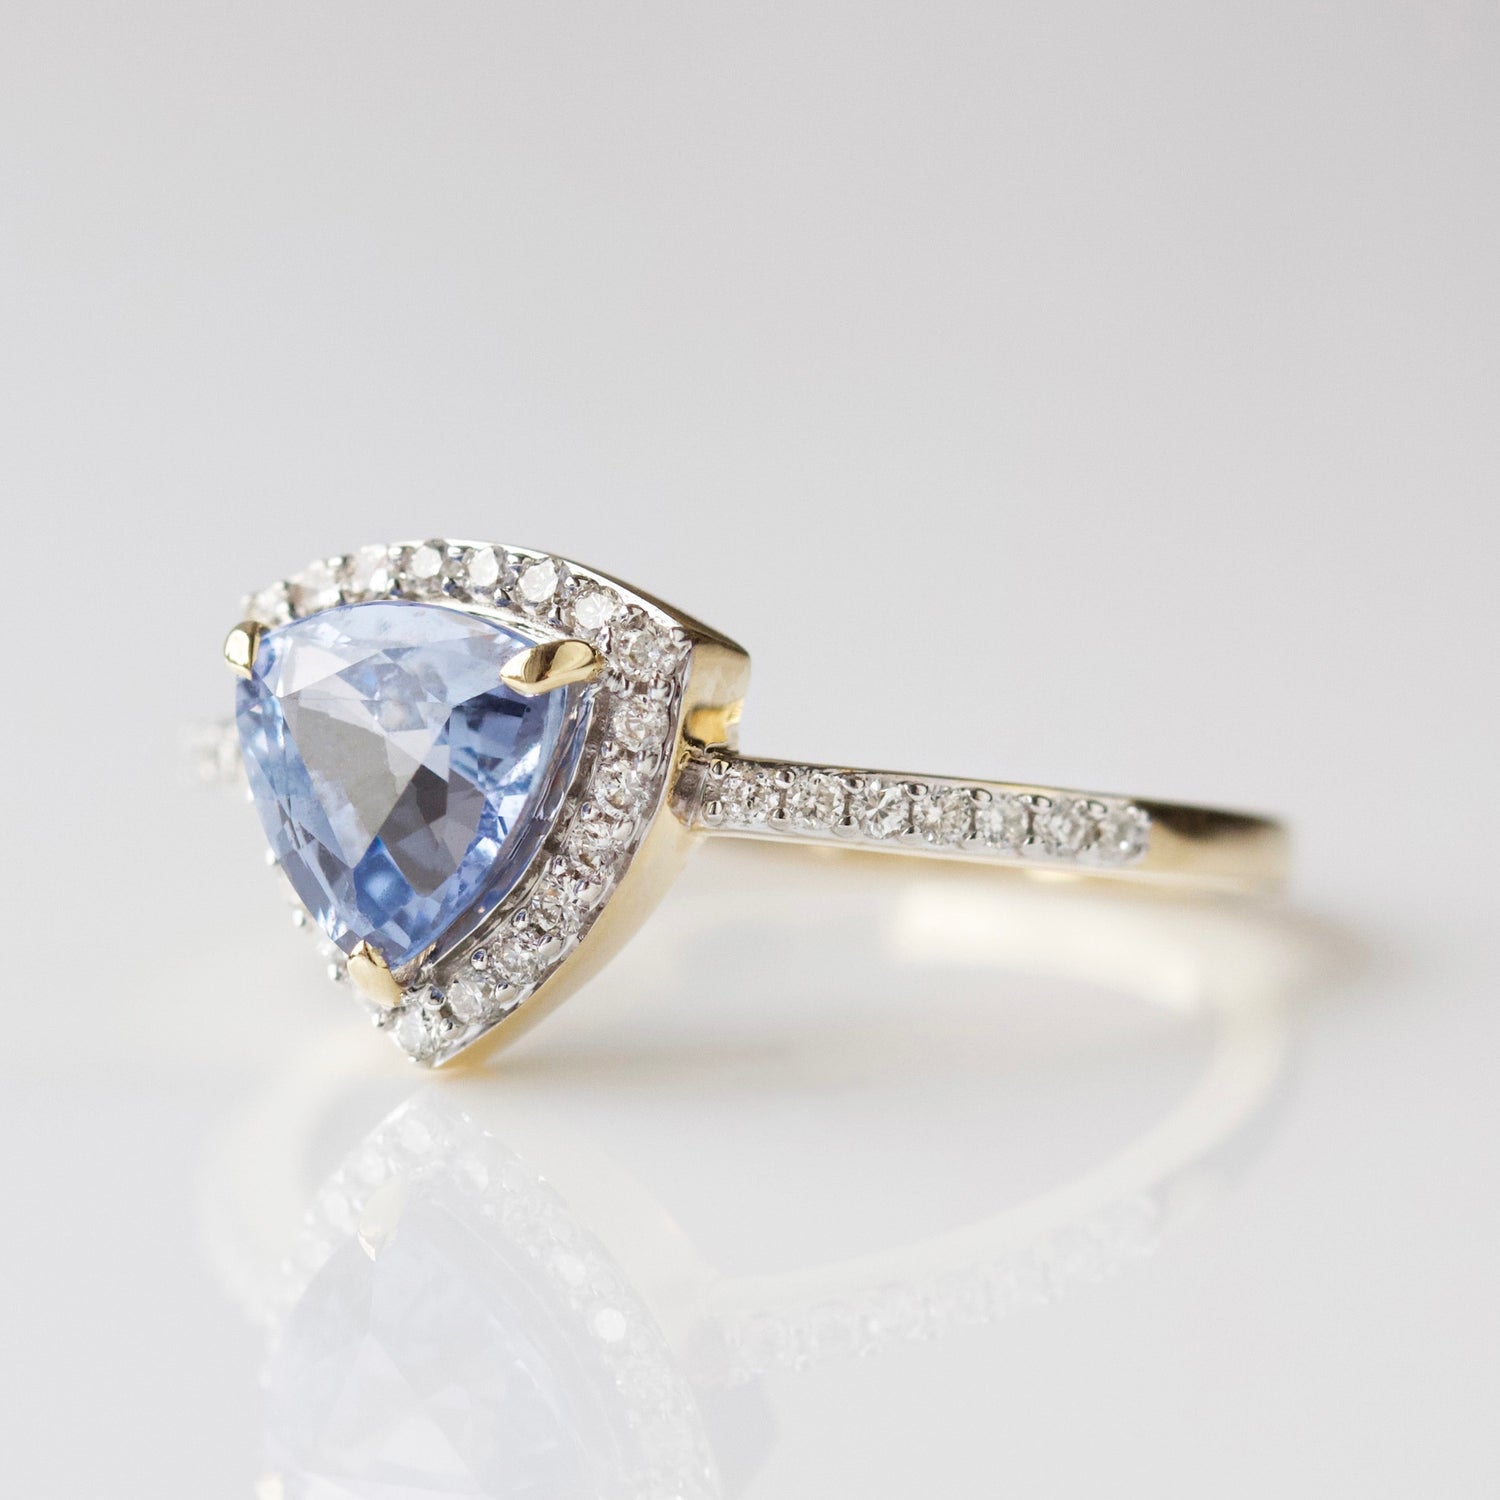 Exclusive blue sapphire and diamond engagement ring in solid gold